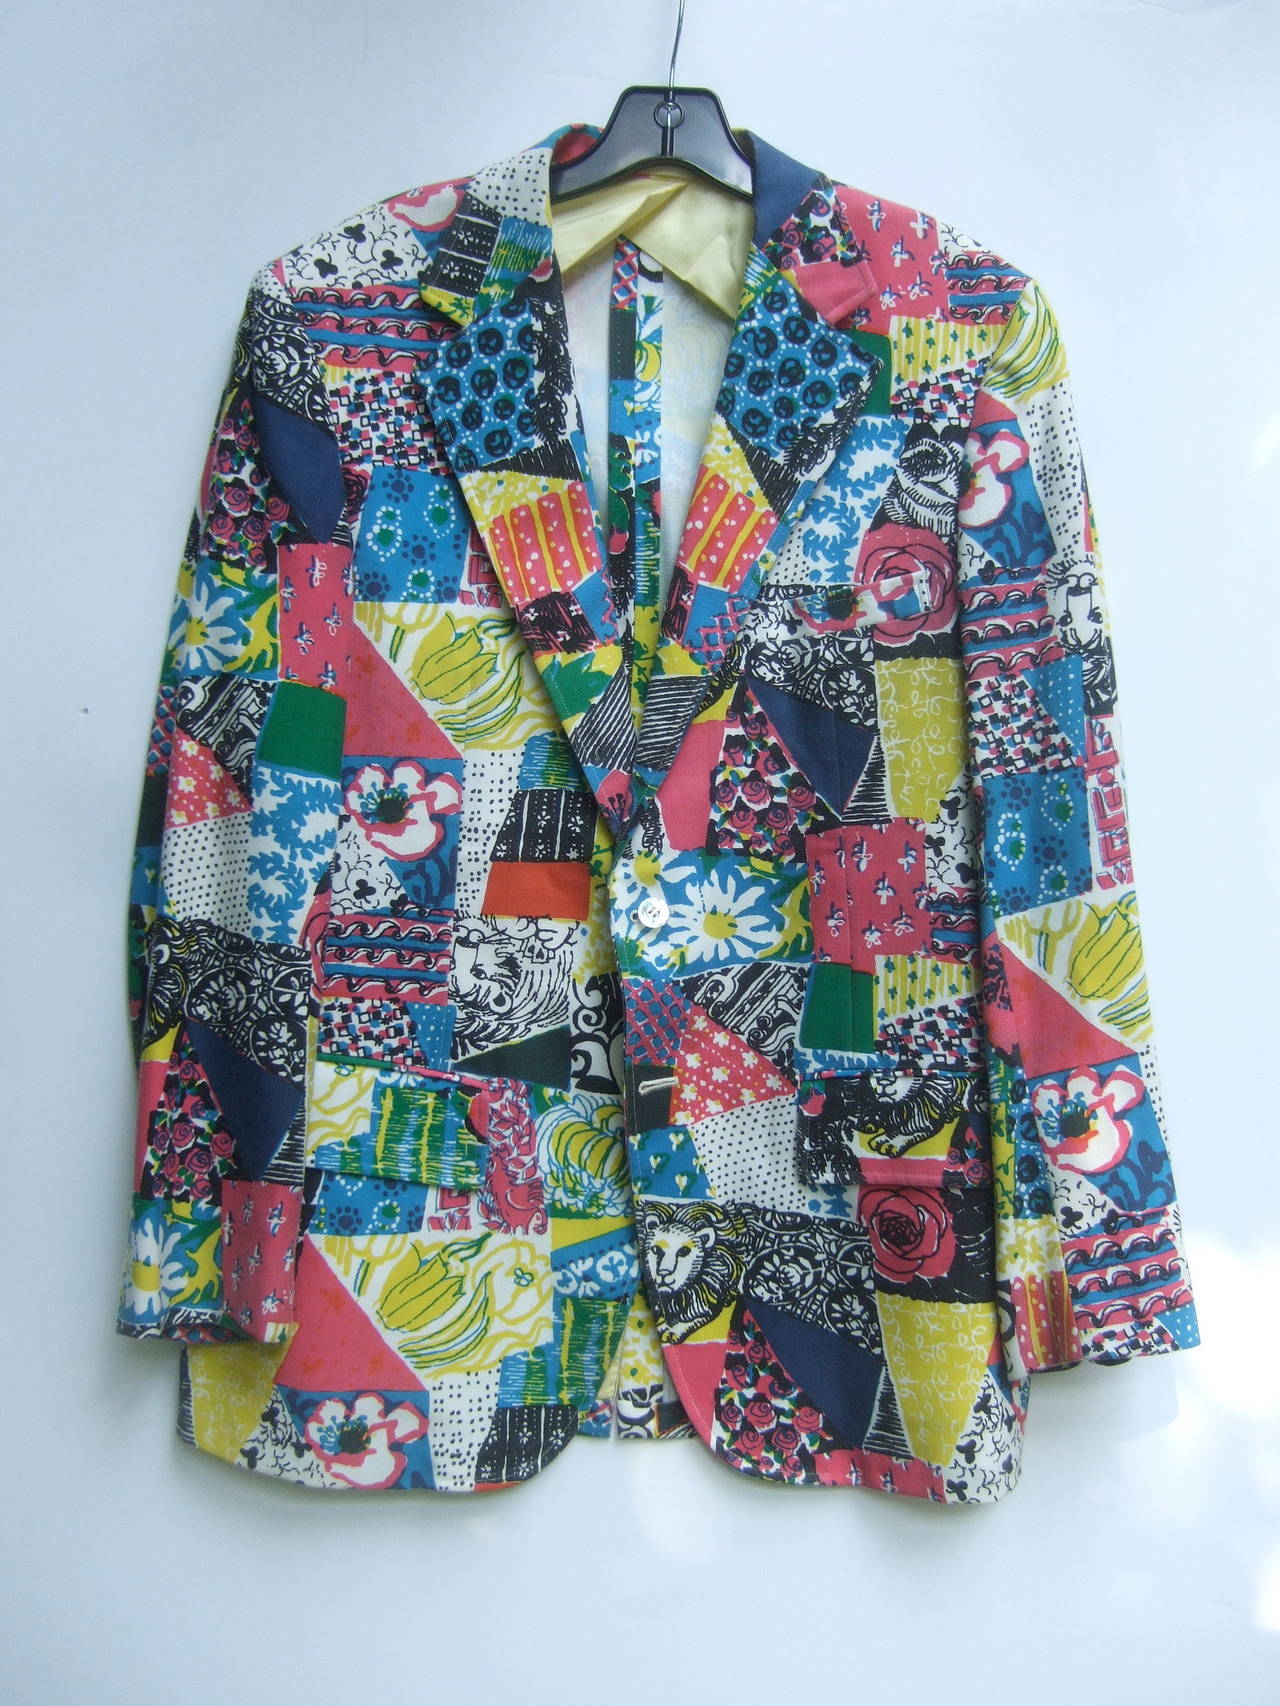 Lilly Pulitzer Men's whimsical print resort jacket c 1970s
The tropical jacket is designed with a collage of vibrant 
graphics. The color block patches are illustrated with
vibrant flower blooms in a myriad of eyecatching colors 

Concealed